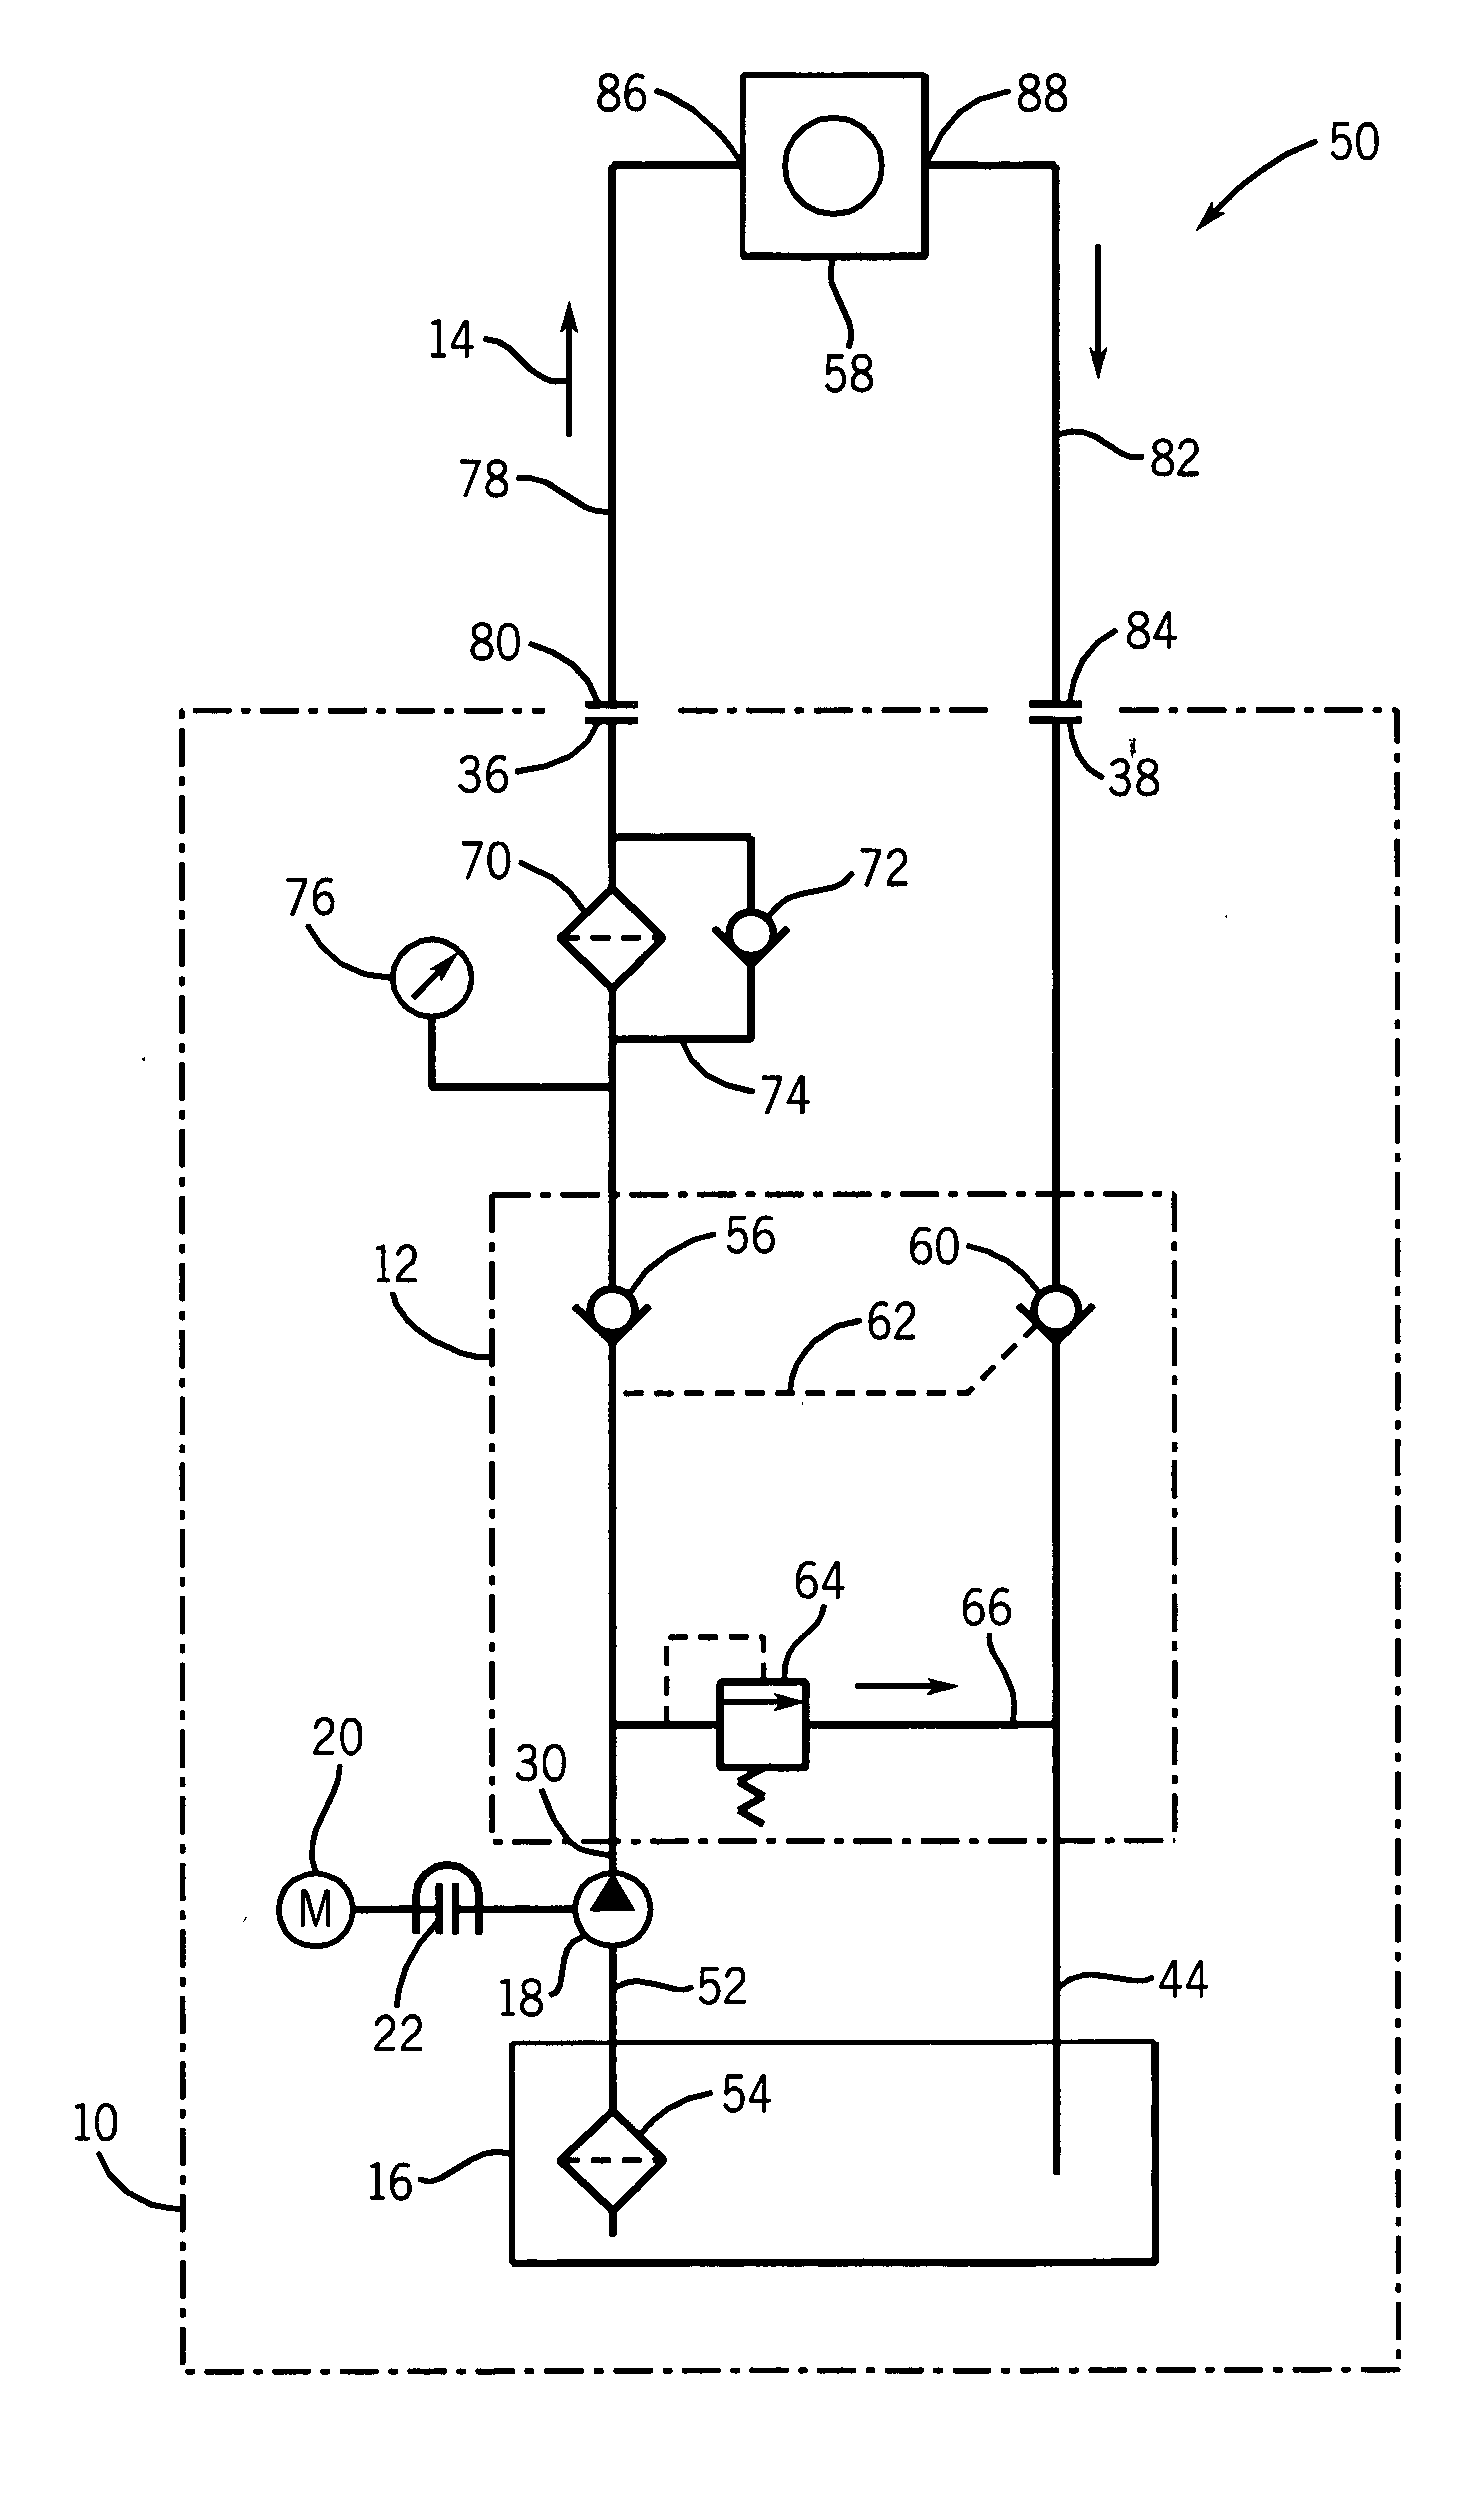 Oil circulation retention system and method